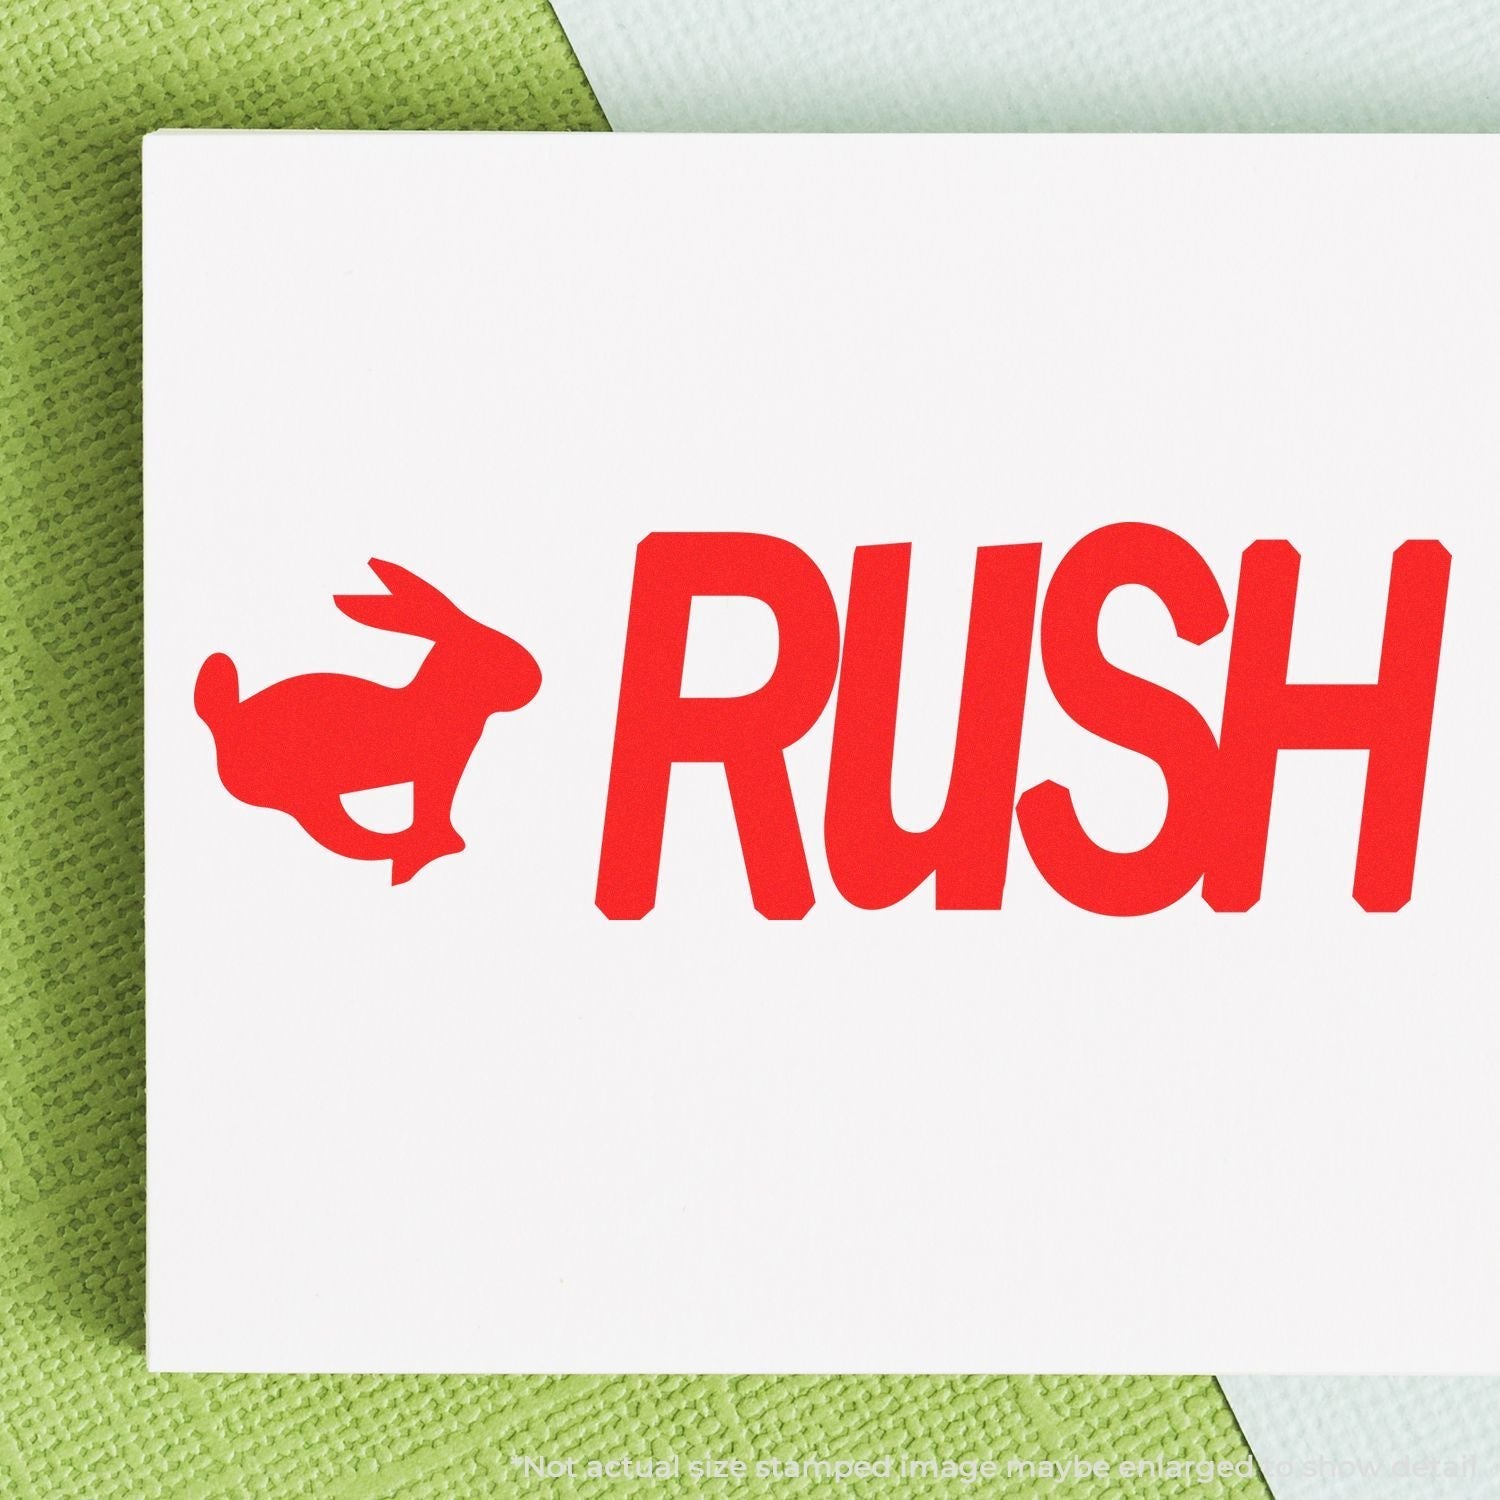 A self-inking stamp with a stamped image showing how the text "RUSH" in bold font and an image of a rabbit on the left is displayed after stamping.